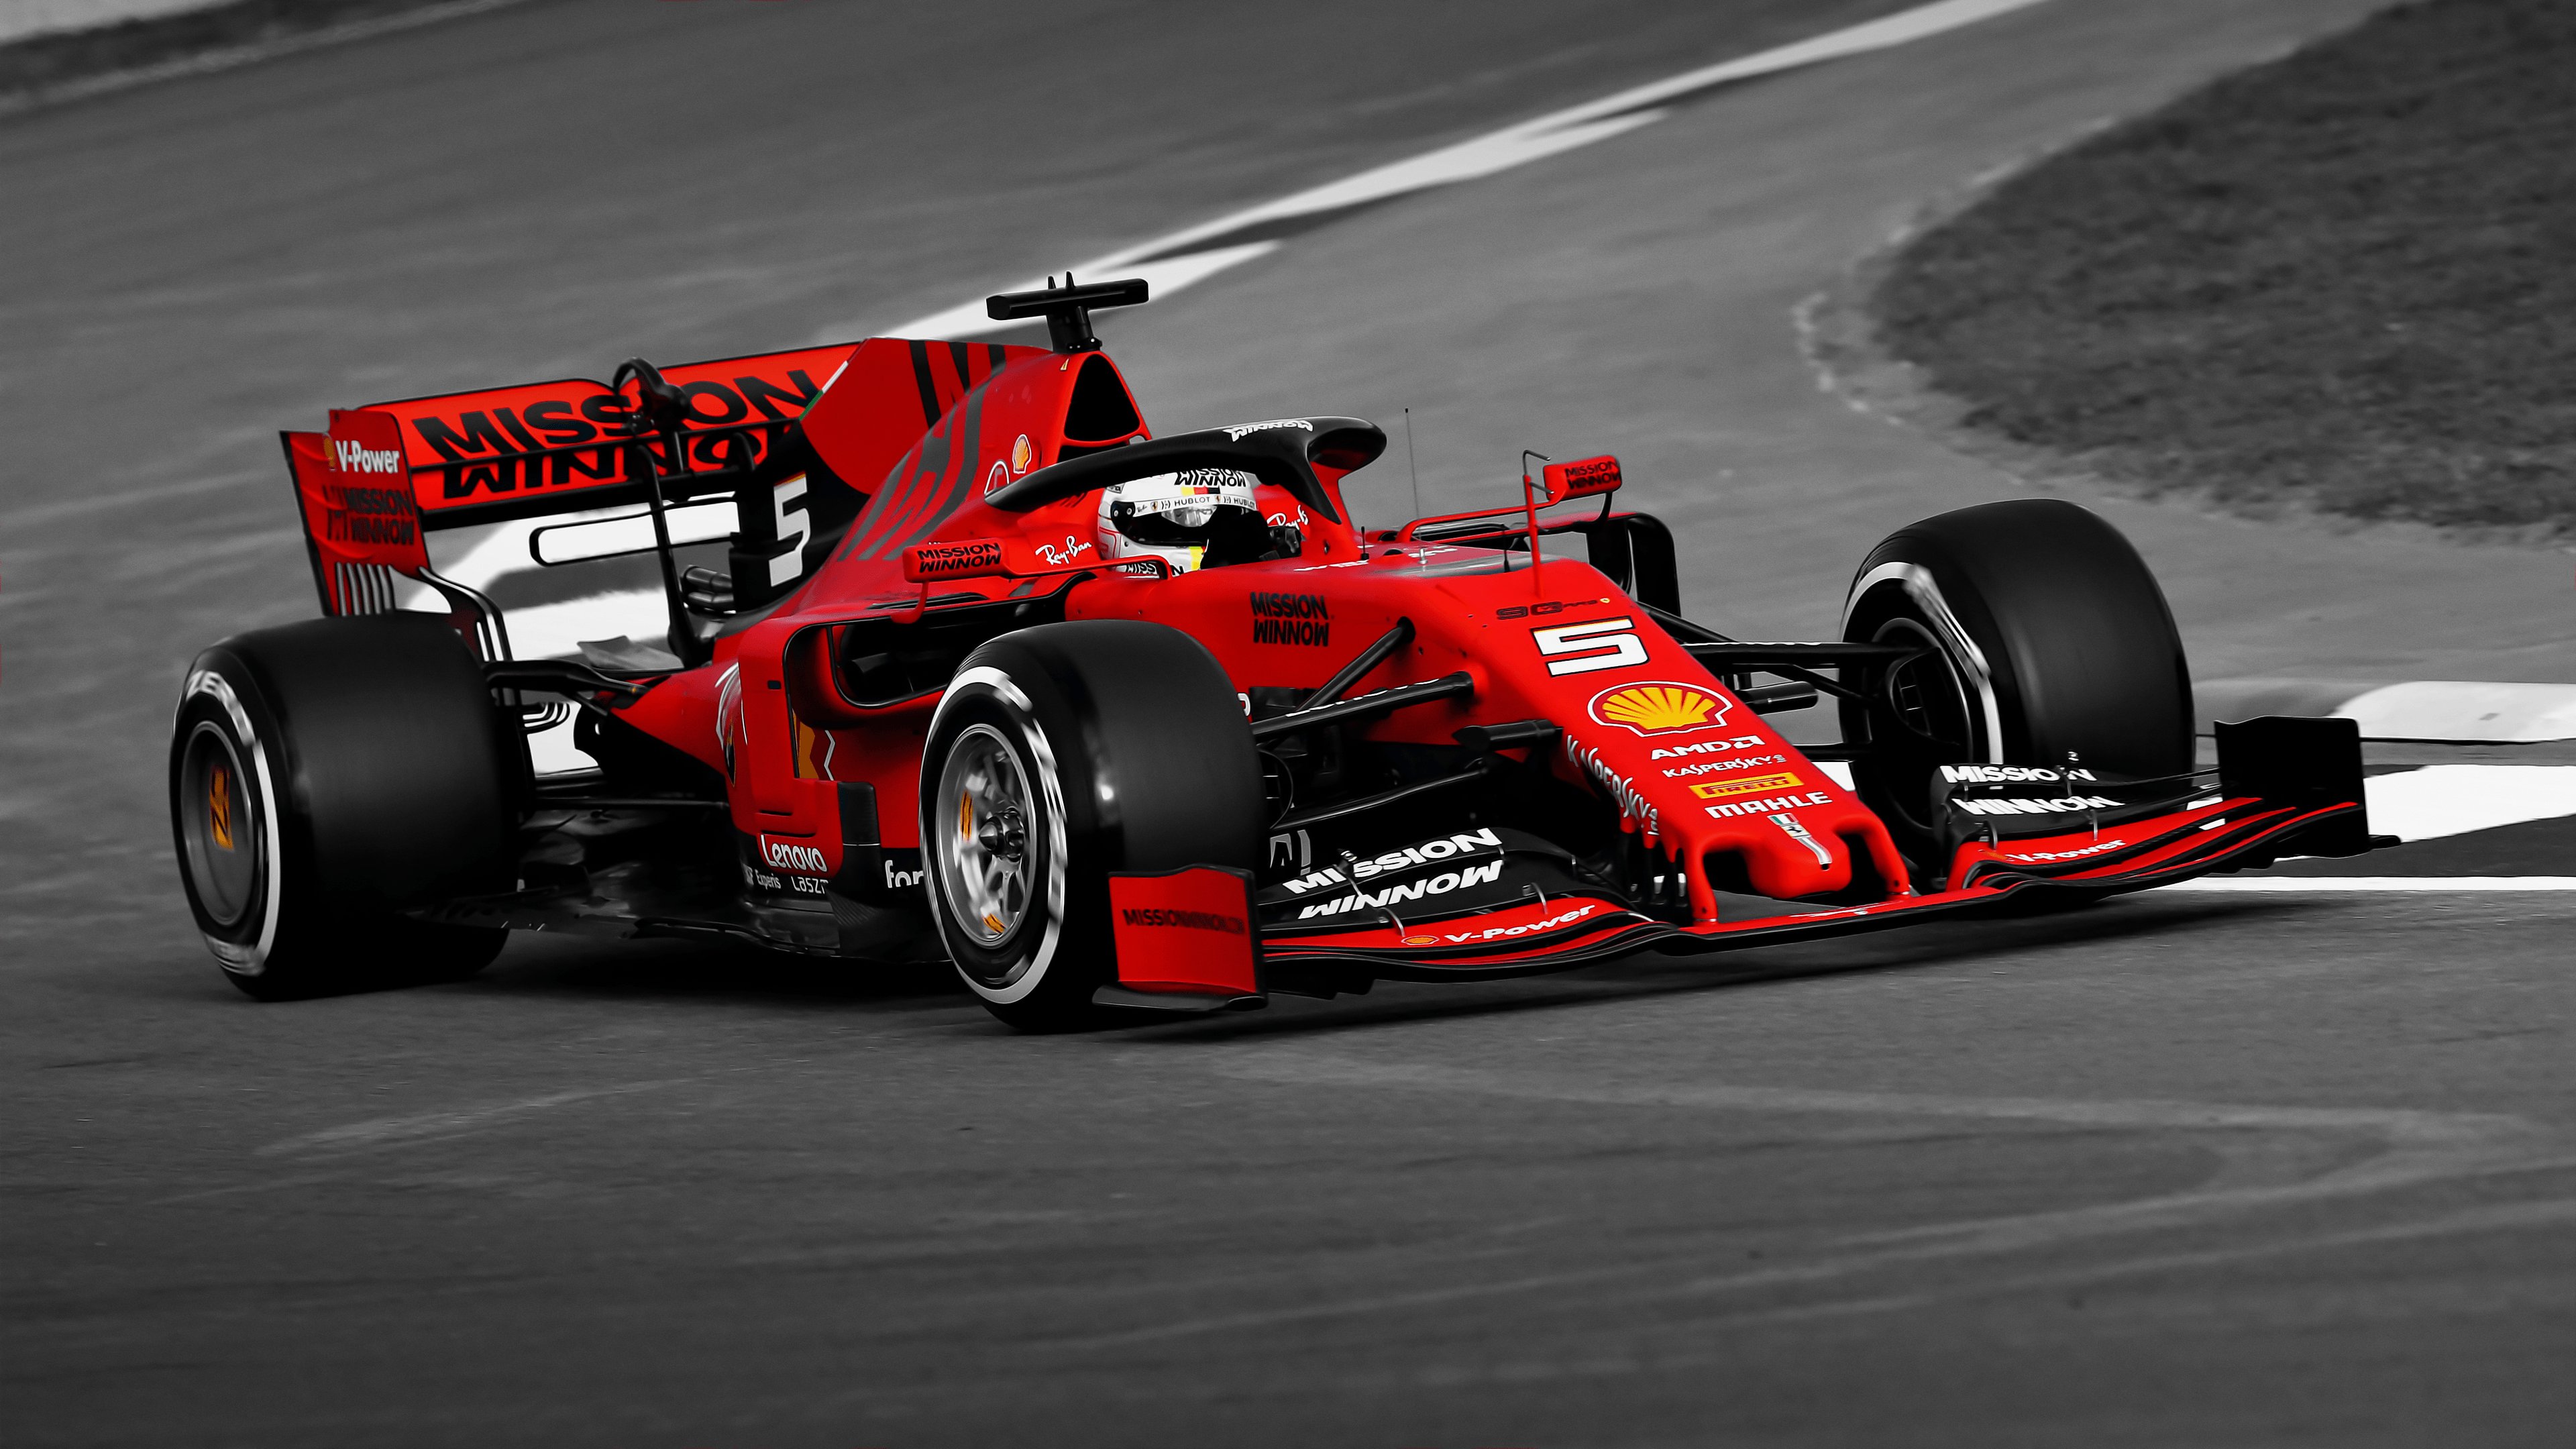 Ferrari SF90 Wallpaper. Didn't find it like this so I gave it a try. Heavily processed to fix compression artifacts. Please share your thoughts I'm new here